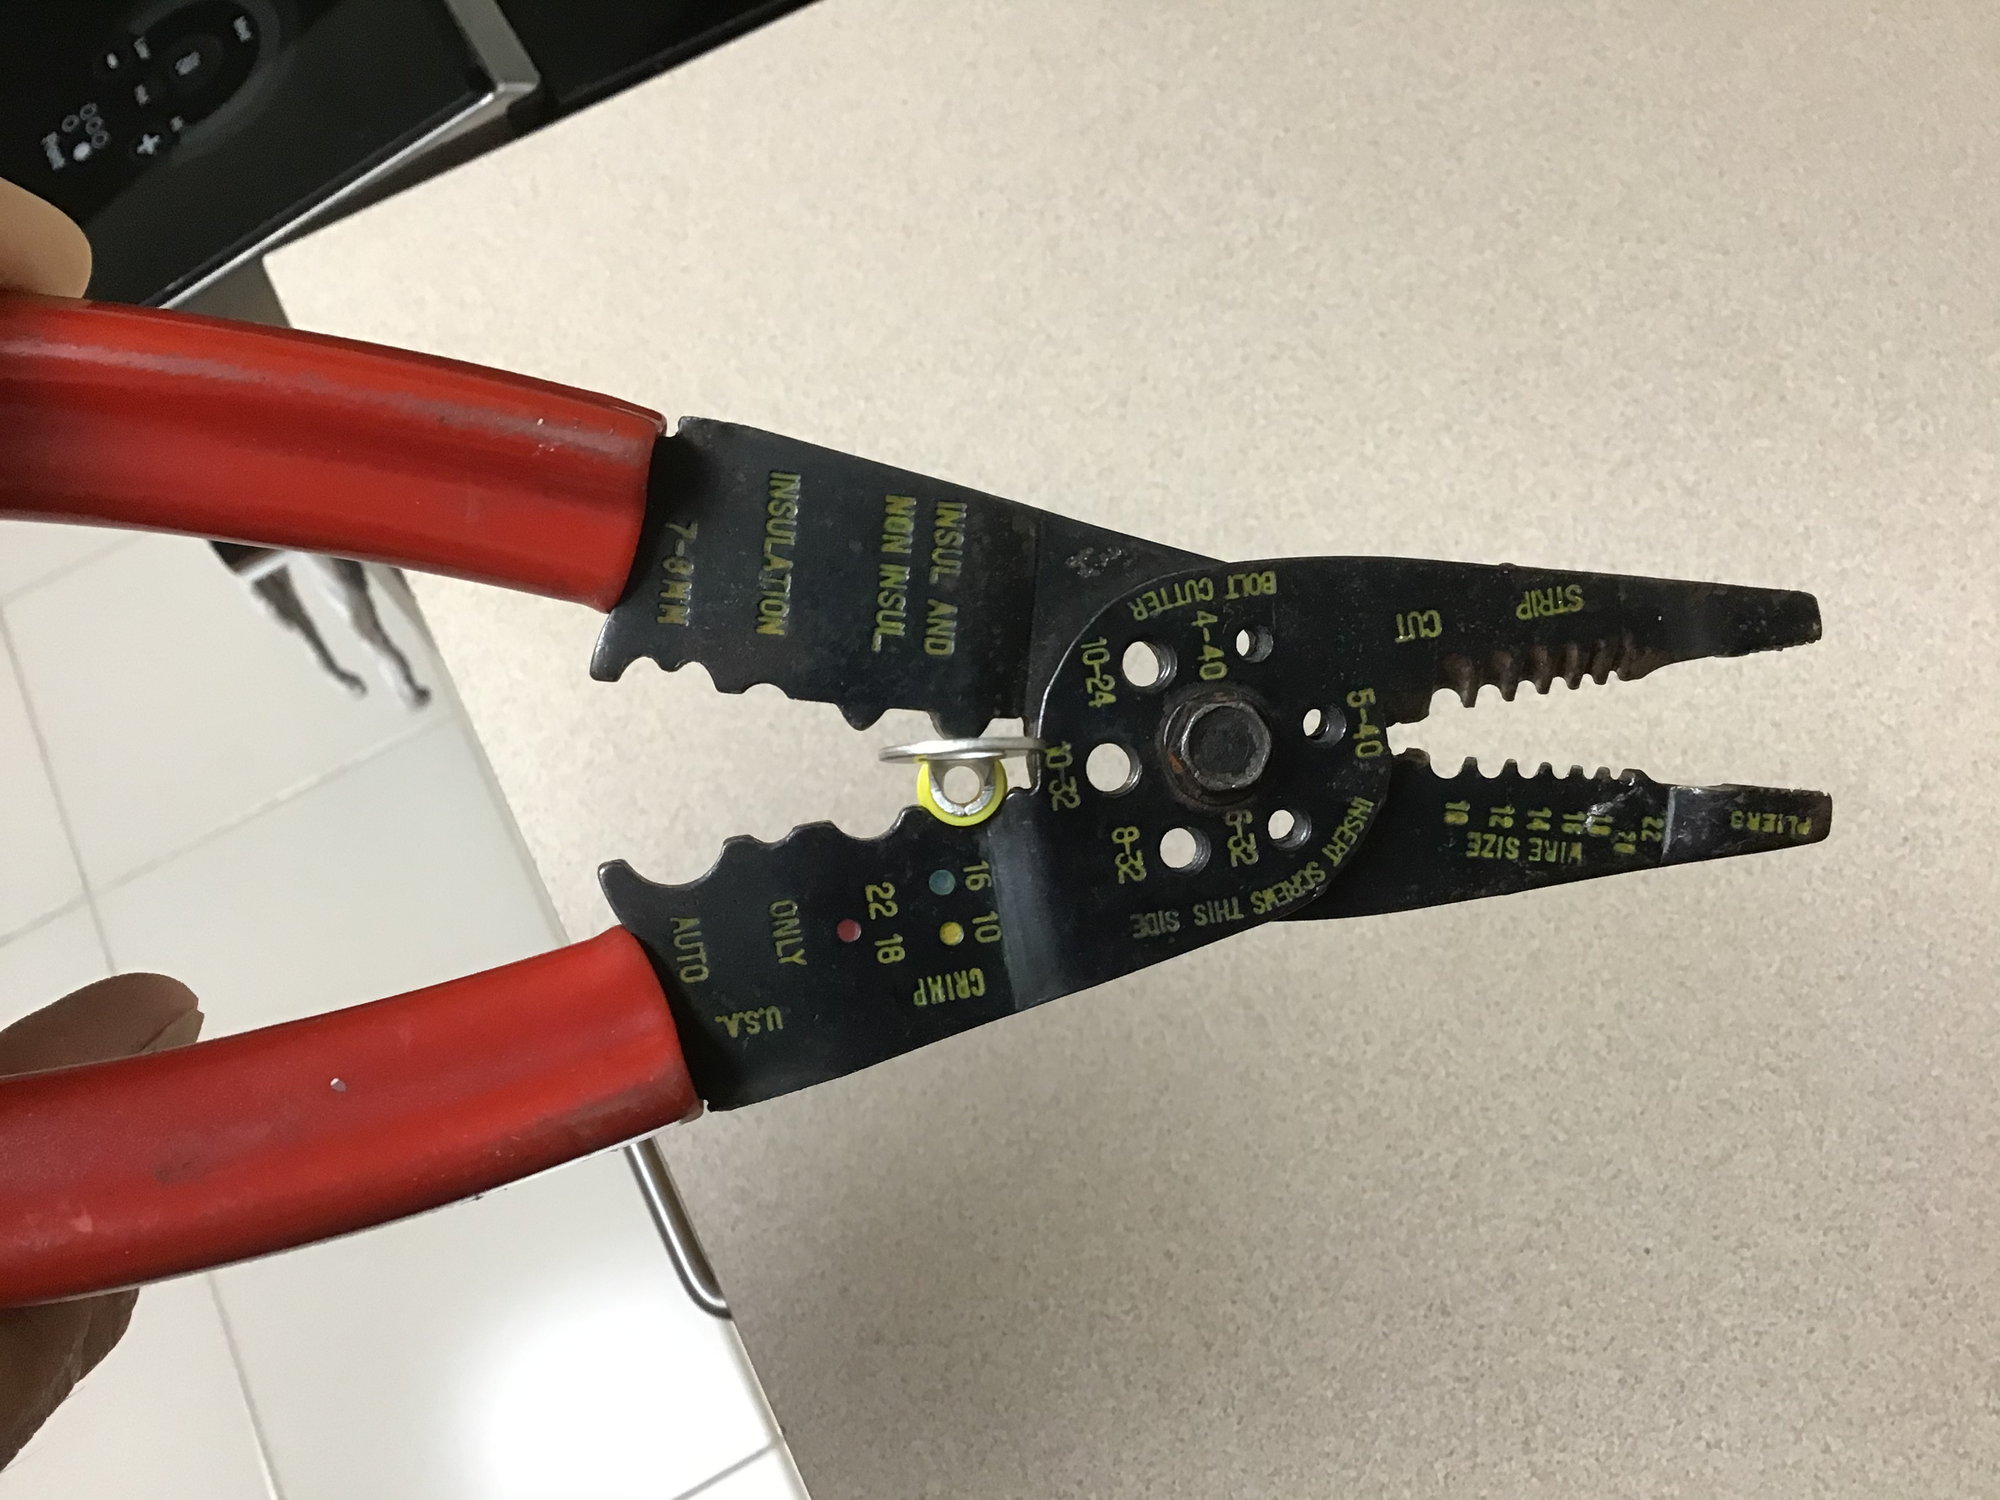 Best hand crimper and crimp set for offshore. - The Hull Truth - Boating  and Fishing Forum